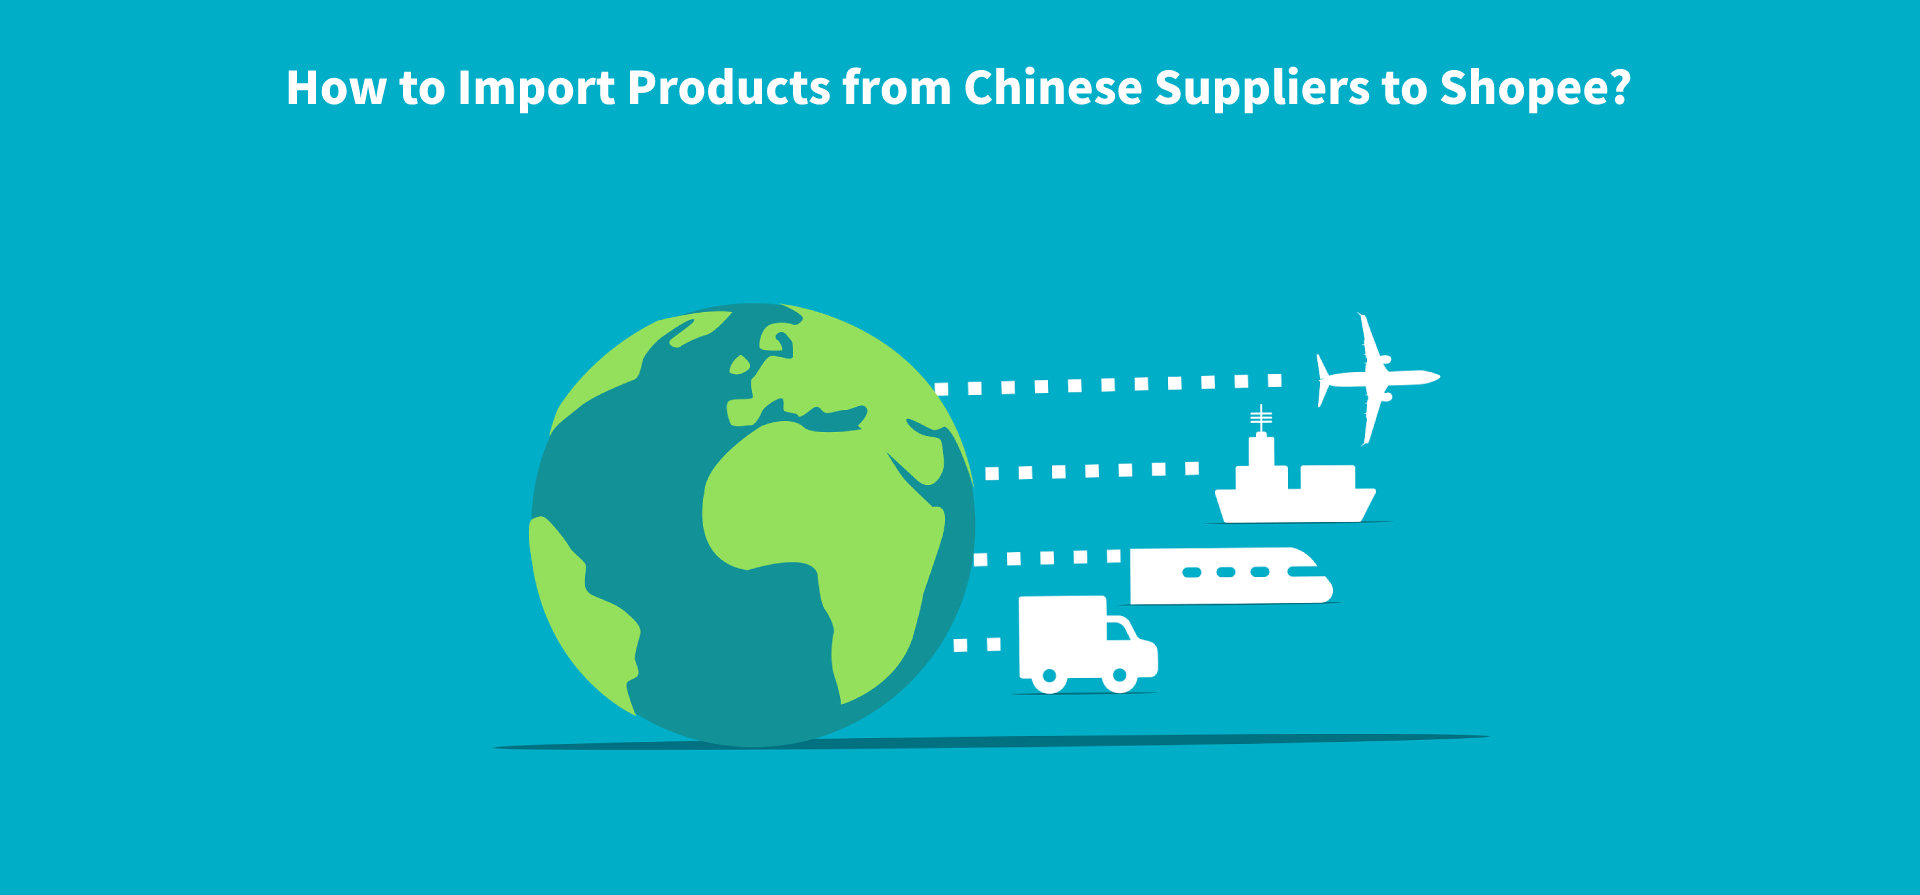 How to Import Products from Chinese Suppliers to Shopee?